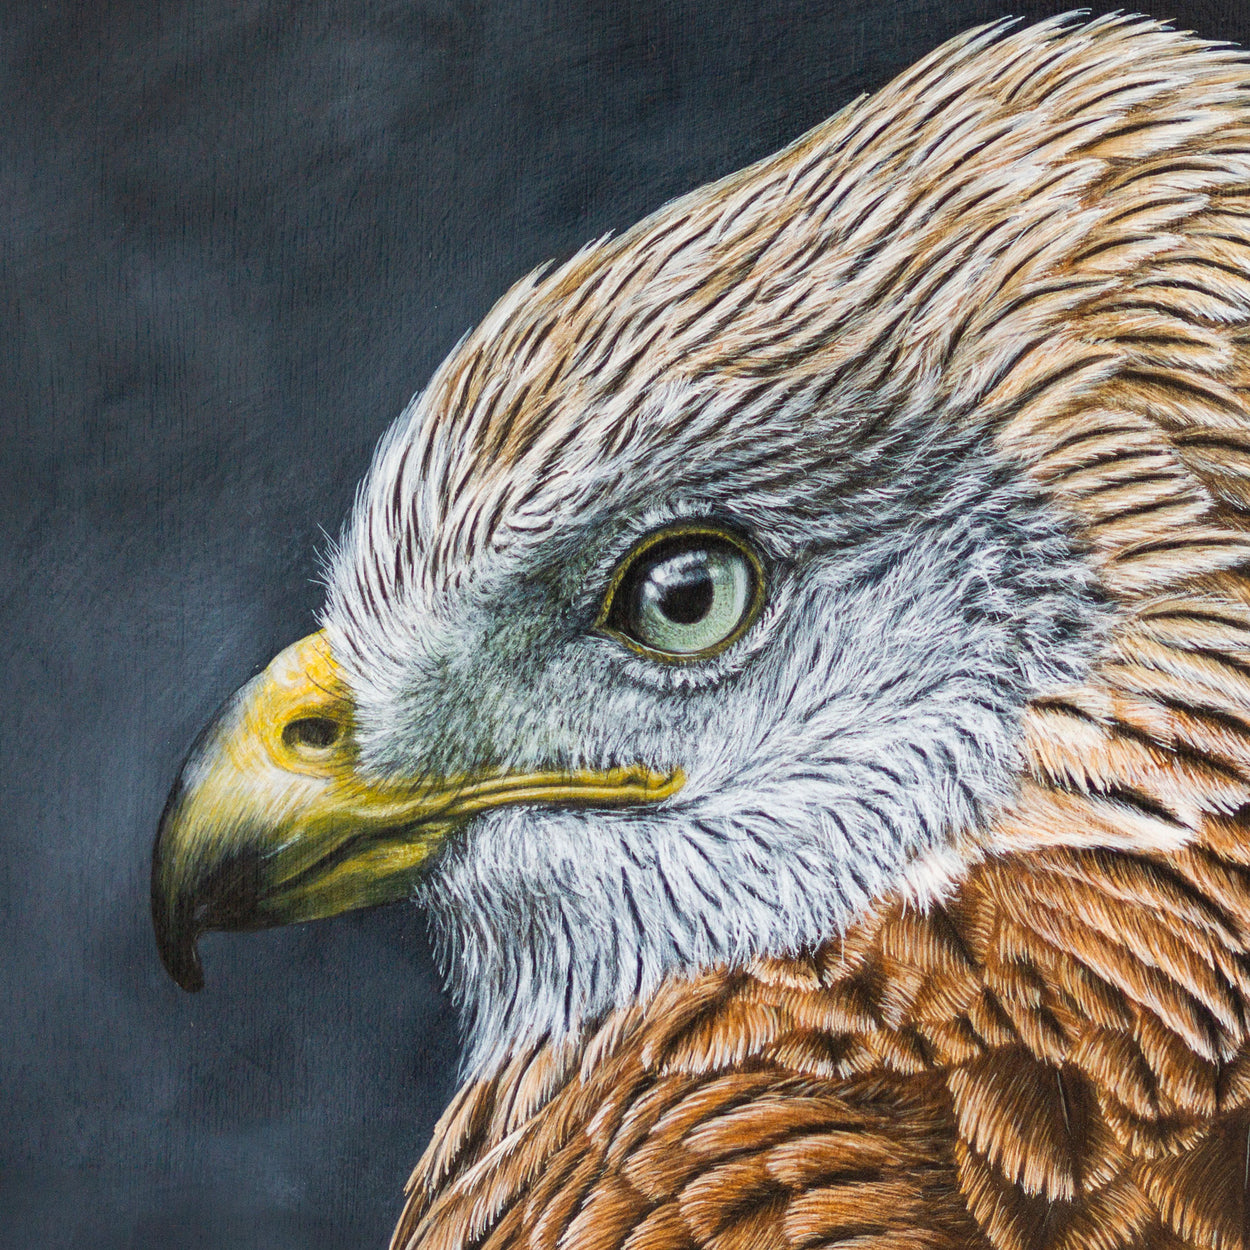 Red Kite Painting Close-up 1 - Jill Dimond